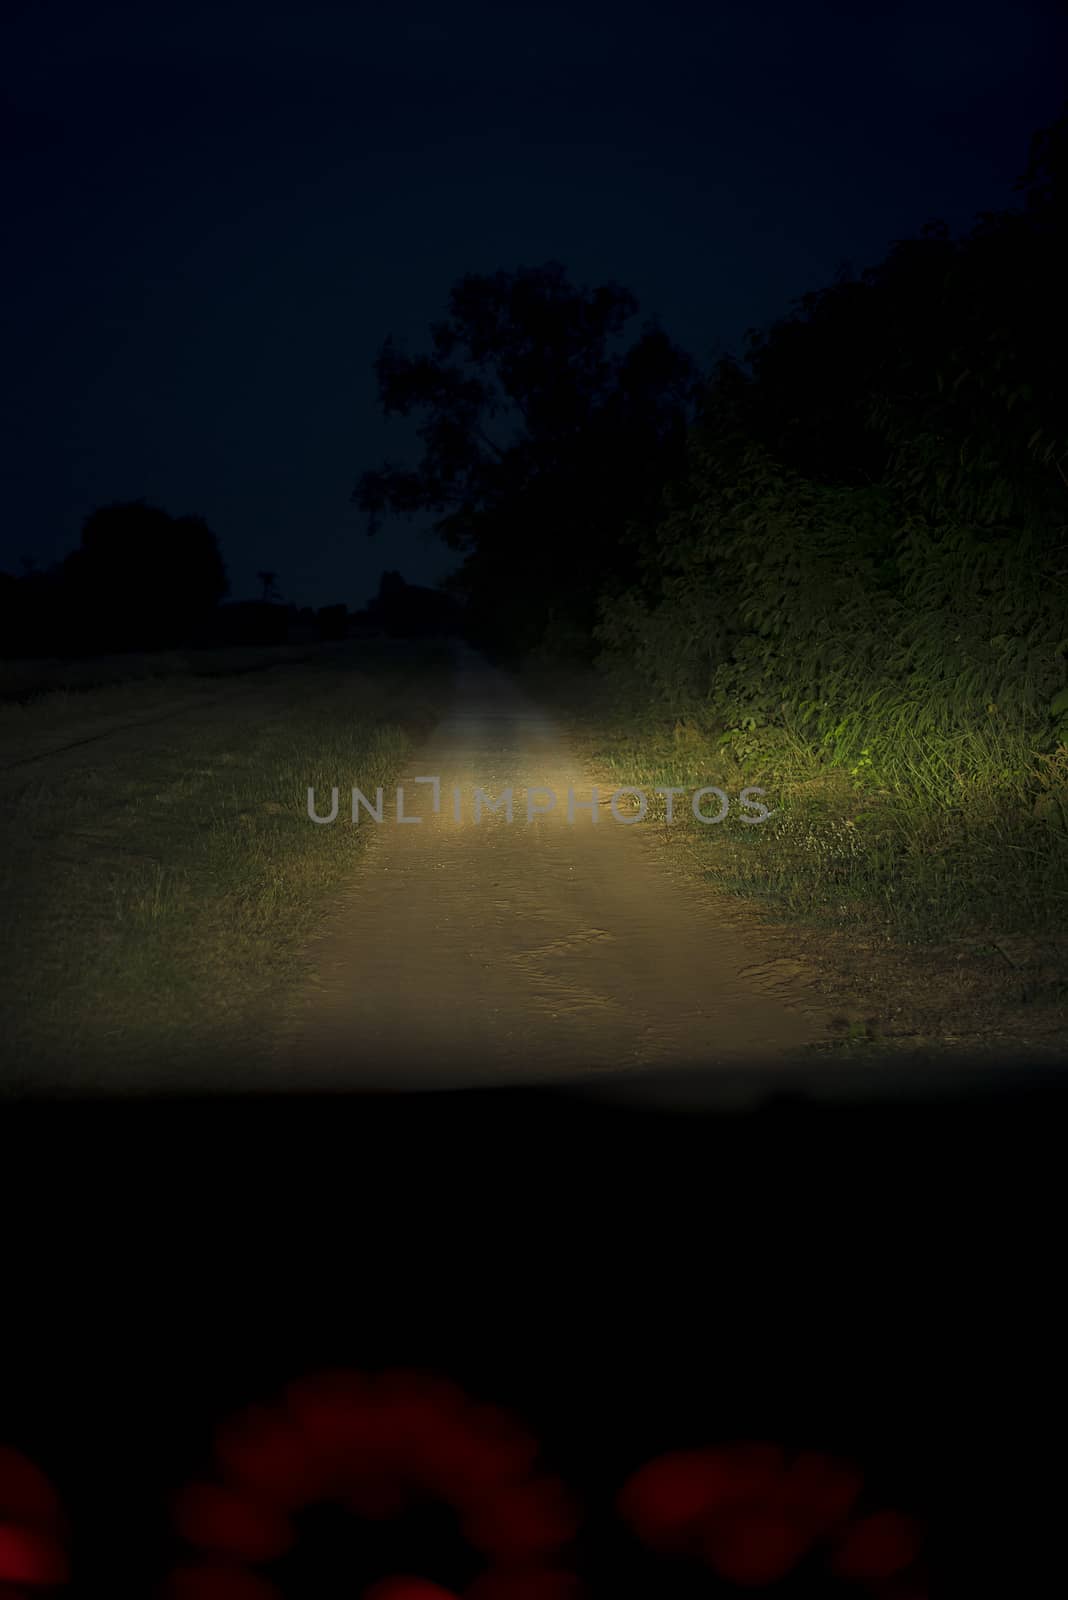 Driving car in the dark road by anatskwong